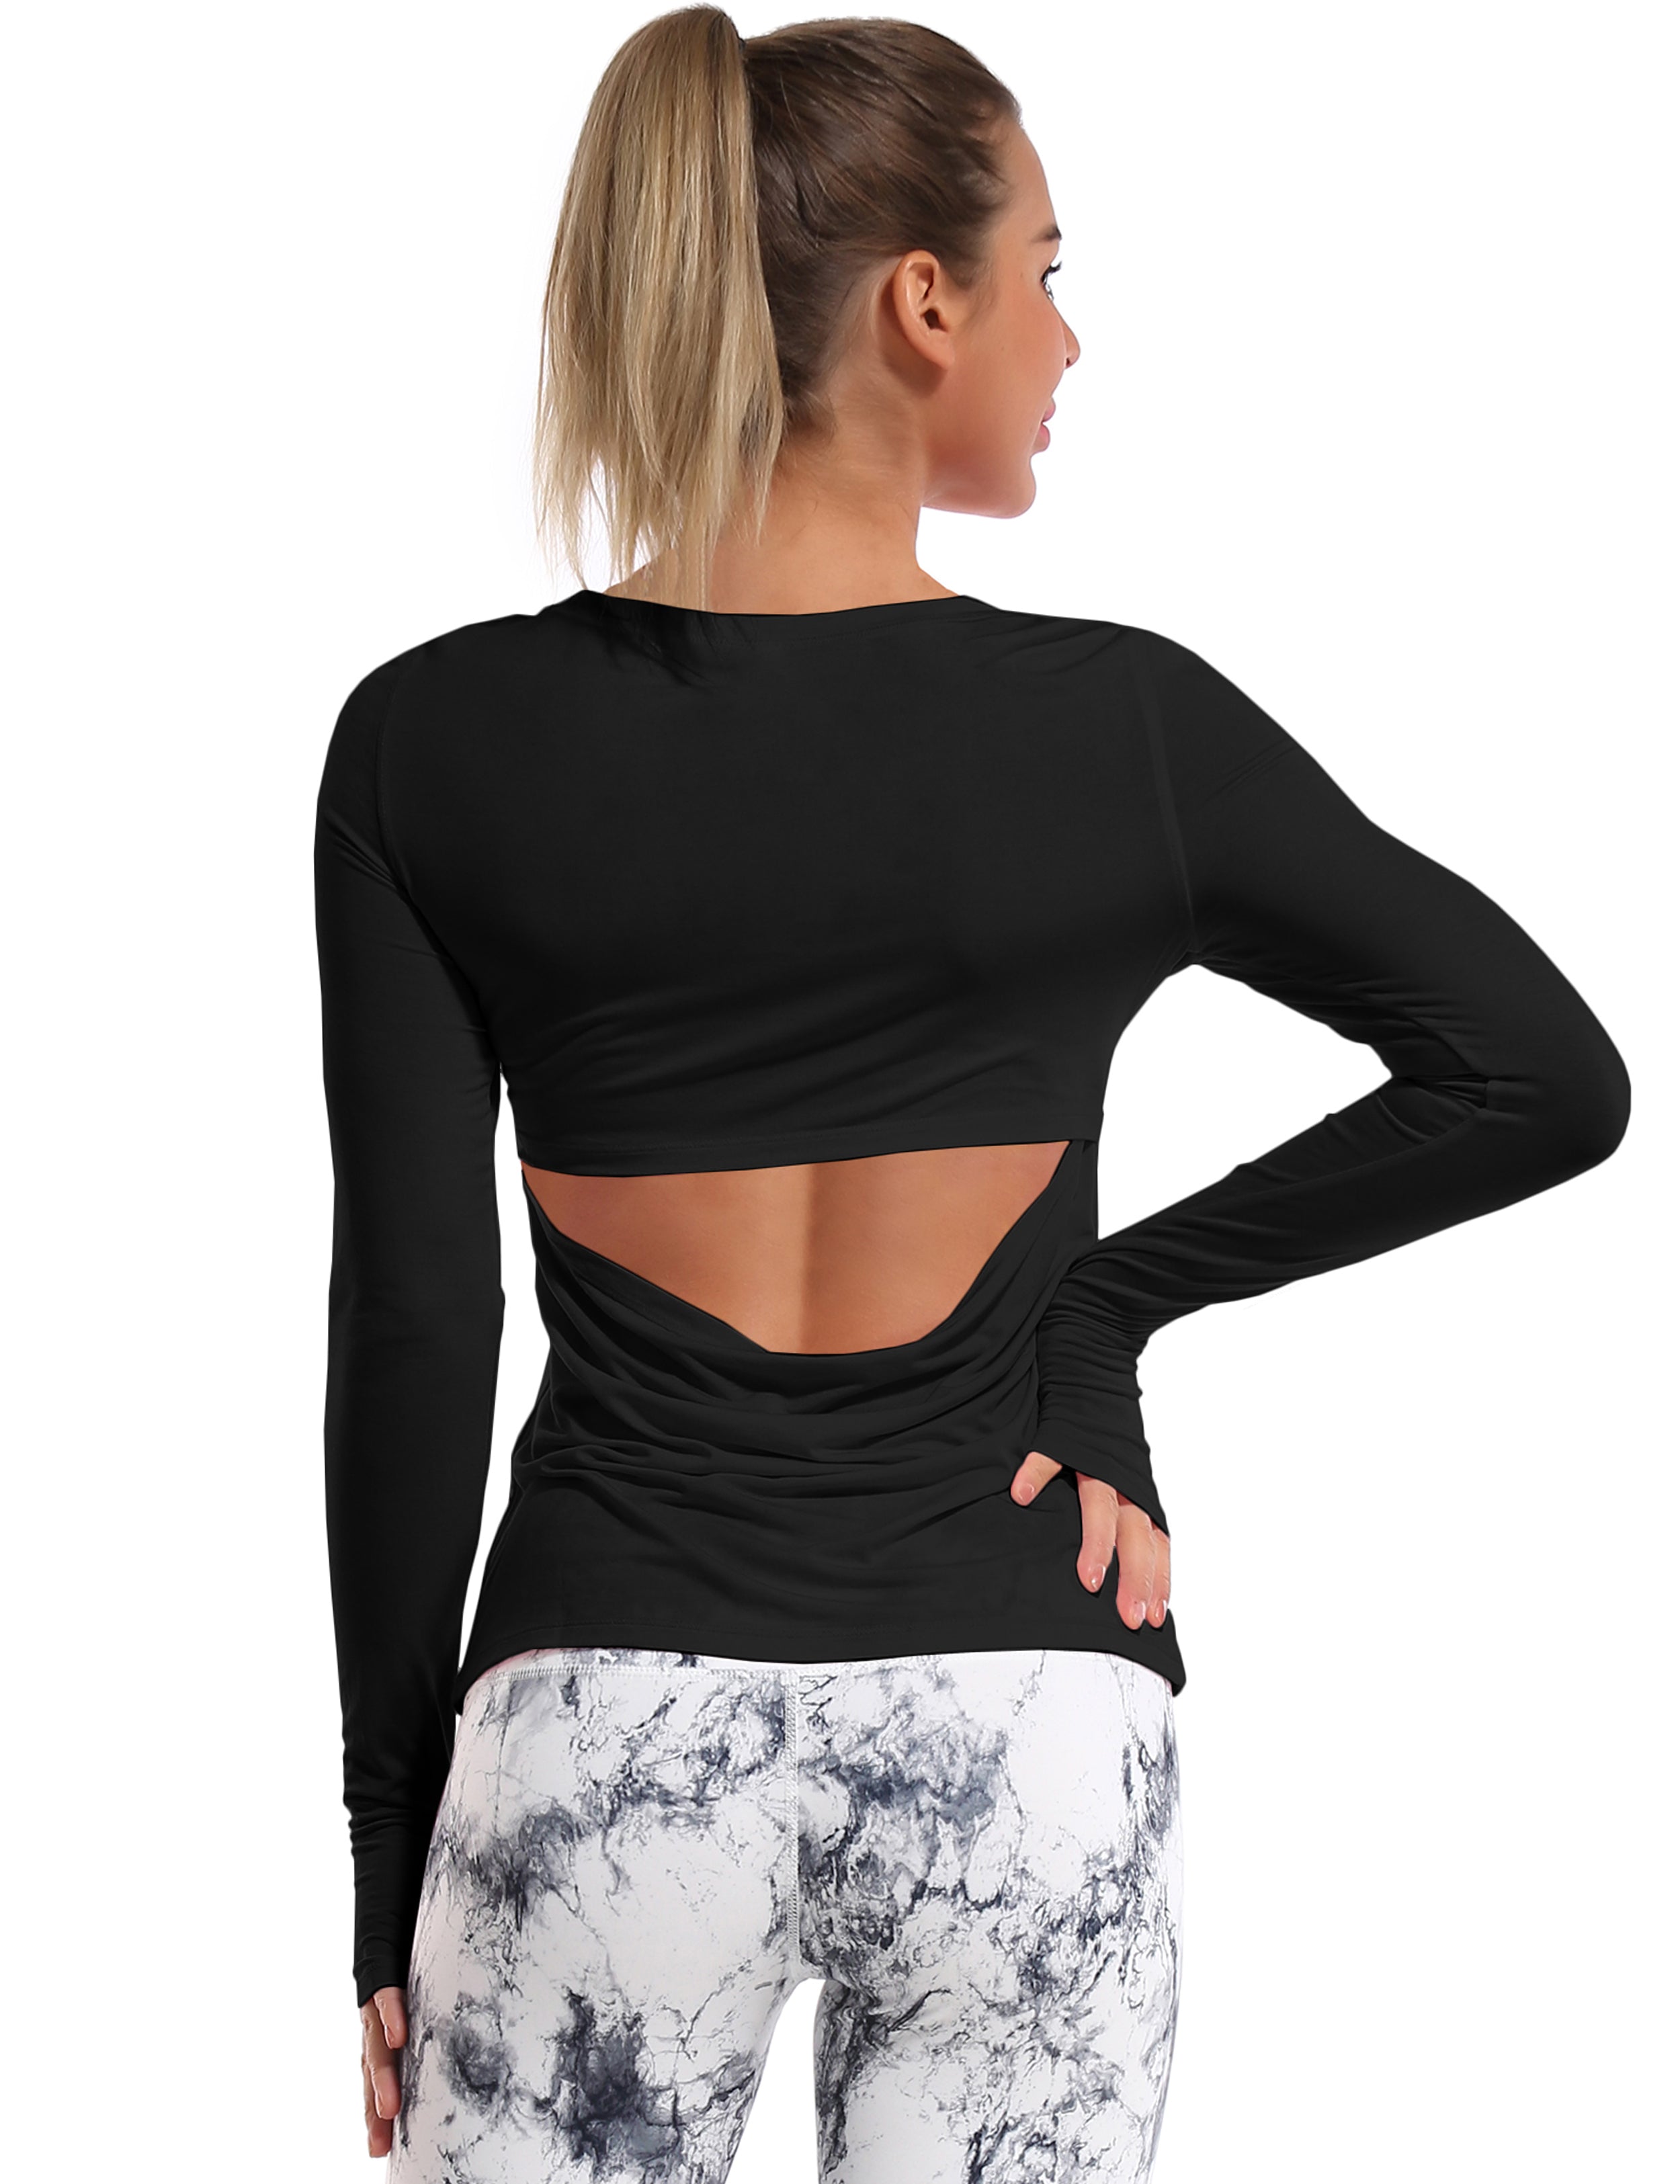 Open Back Long Sleeve Tops black Designed for On the Move Slim fit 93%Modal/7%Spandex Four-way stretch Naturally breathable Super-Soft, Modal Fabric